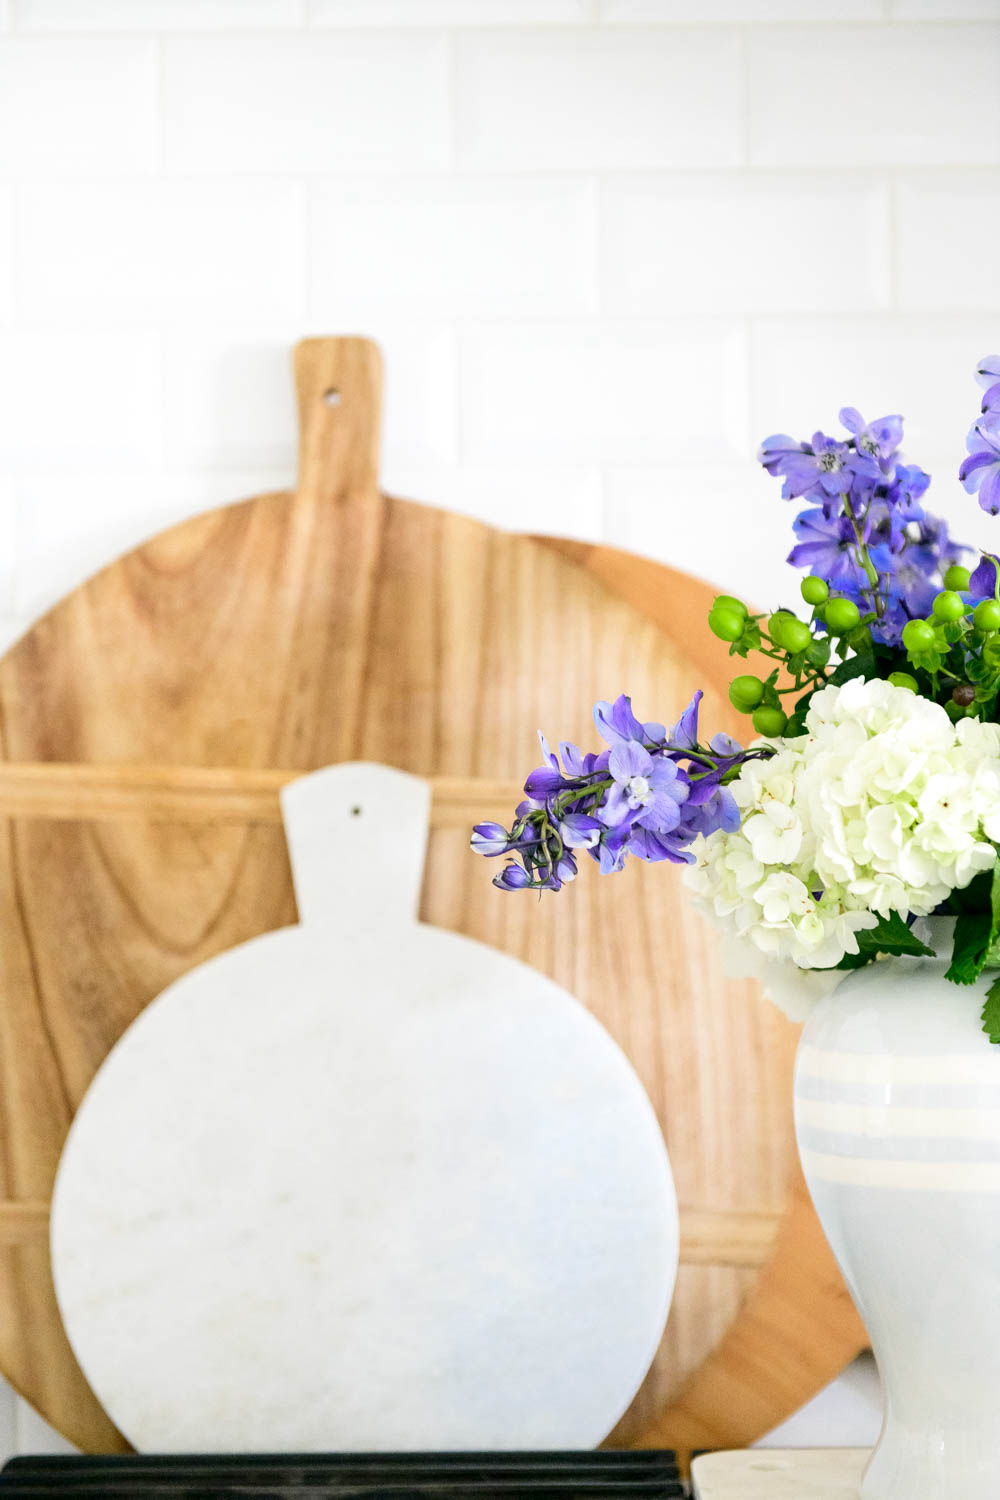 Grocery store flowers, cooktop, kitchen stove, blue and white gingham. #ABlissfulNest #whitekicthen #kitchendecor #kitchenstyle